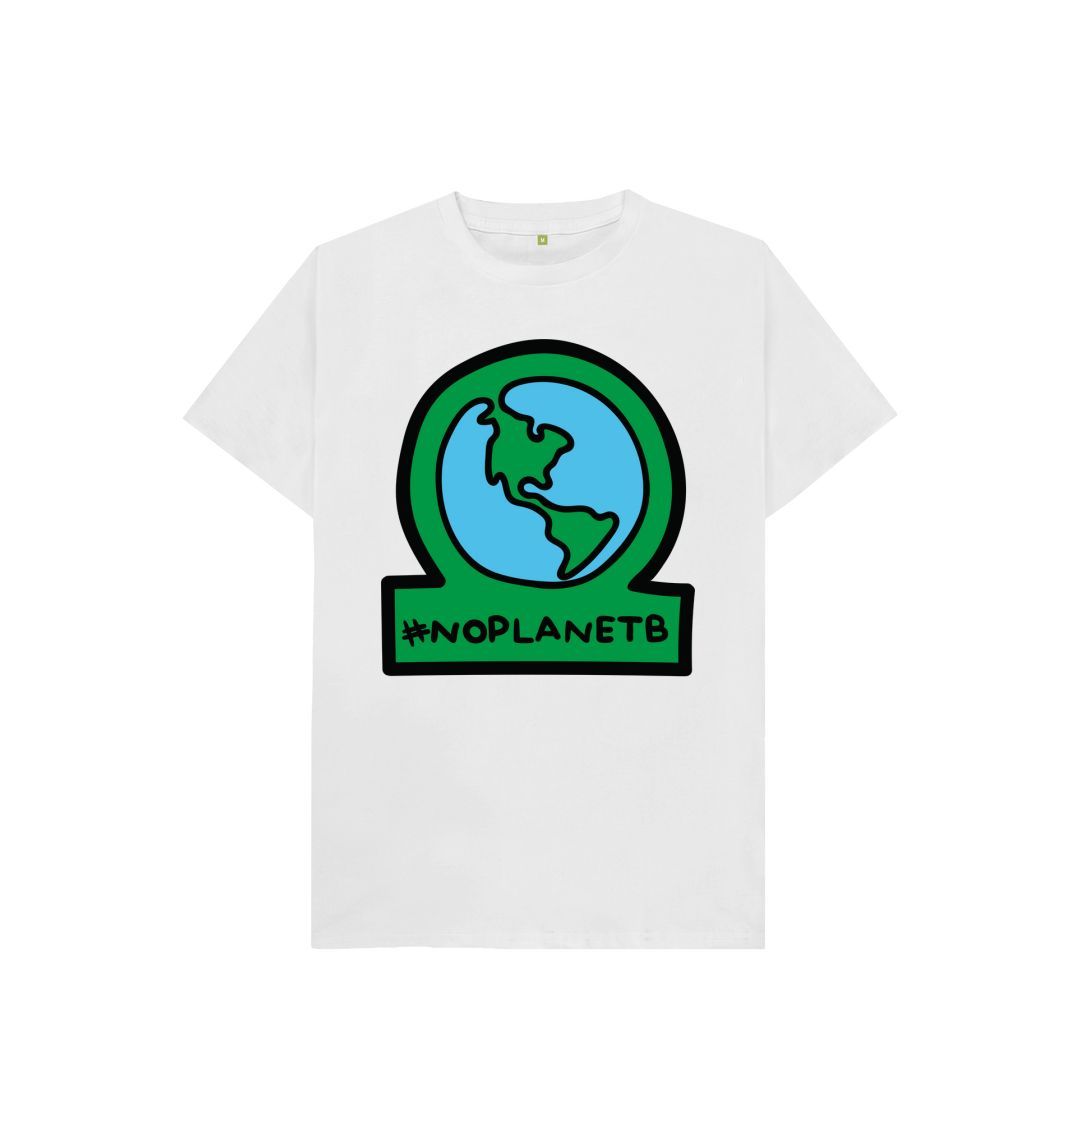 White Kids' Sustainable T-Shirt - Earth's Advocate: #noplanetB